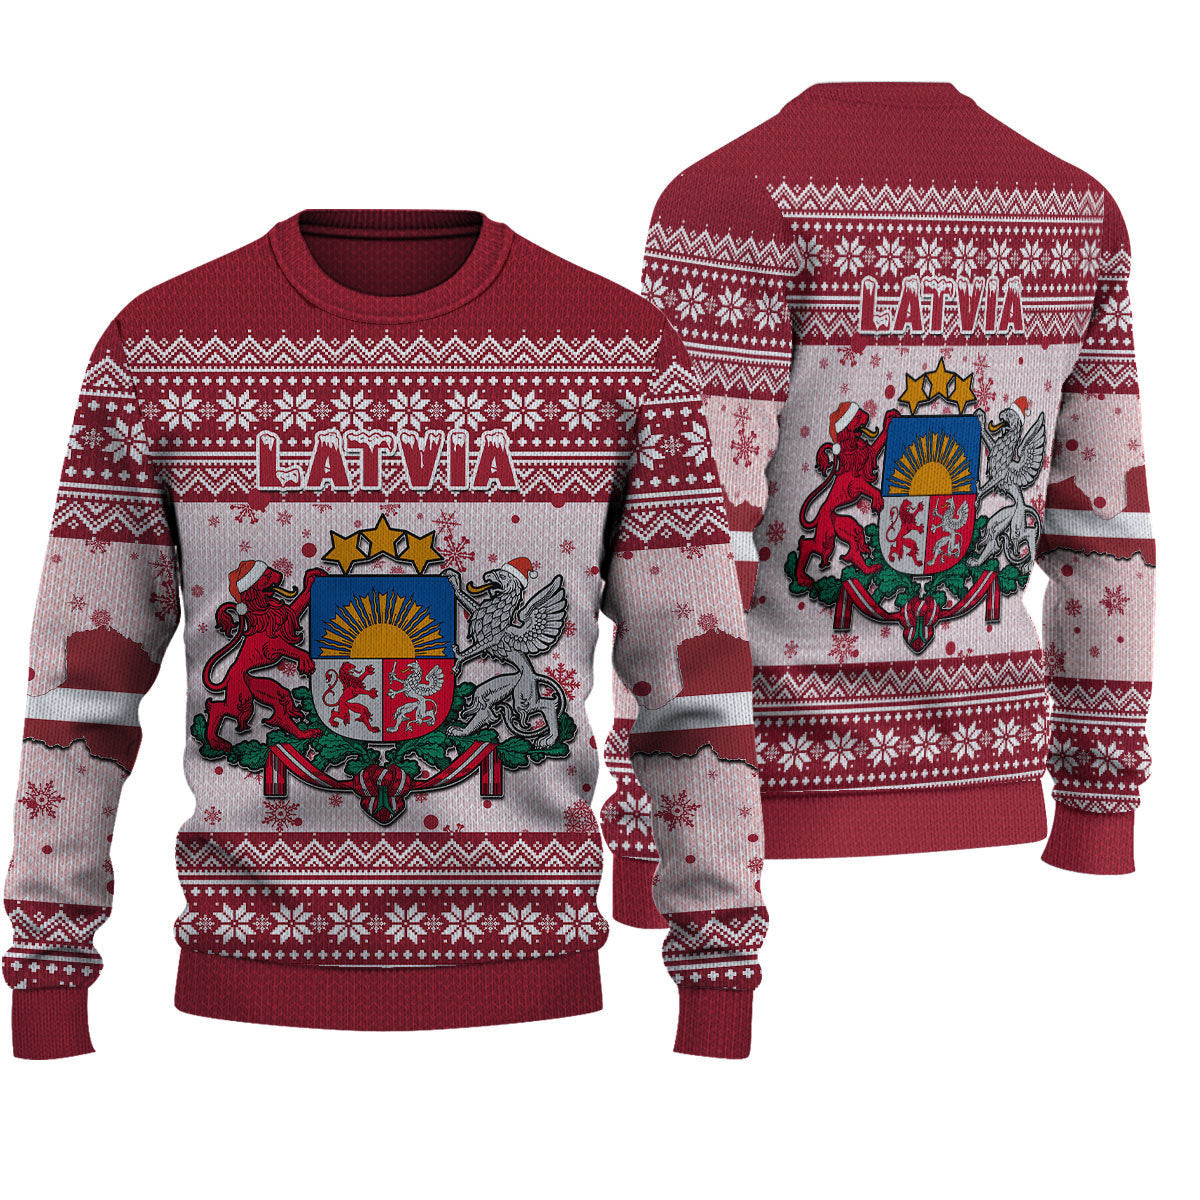 wonder-print-shop-ugly-sweater-latvia-christmas-knitted-sweater